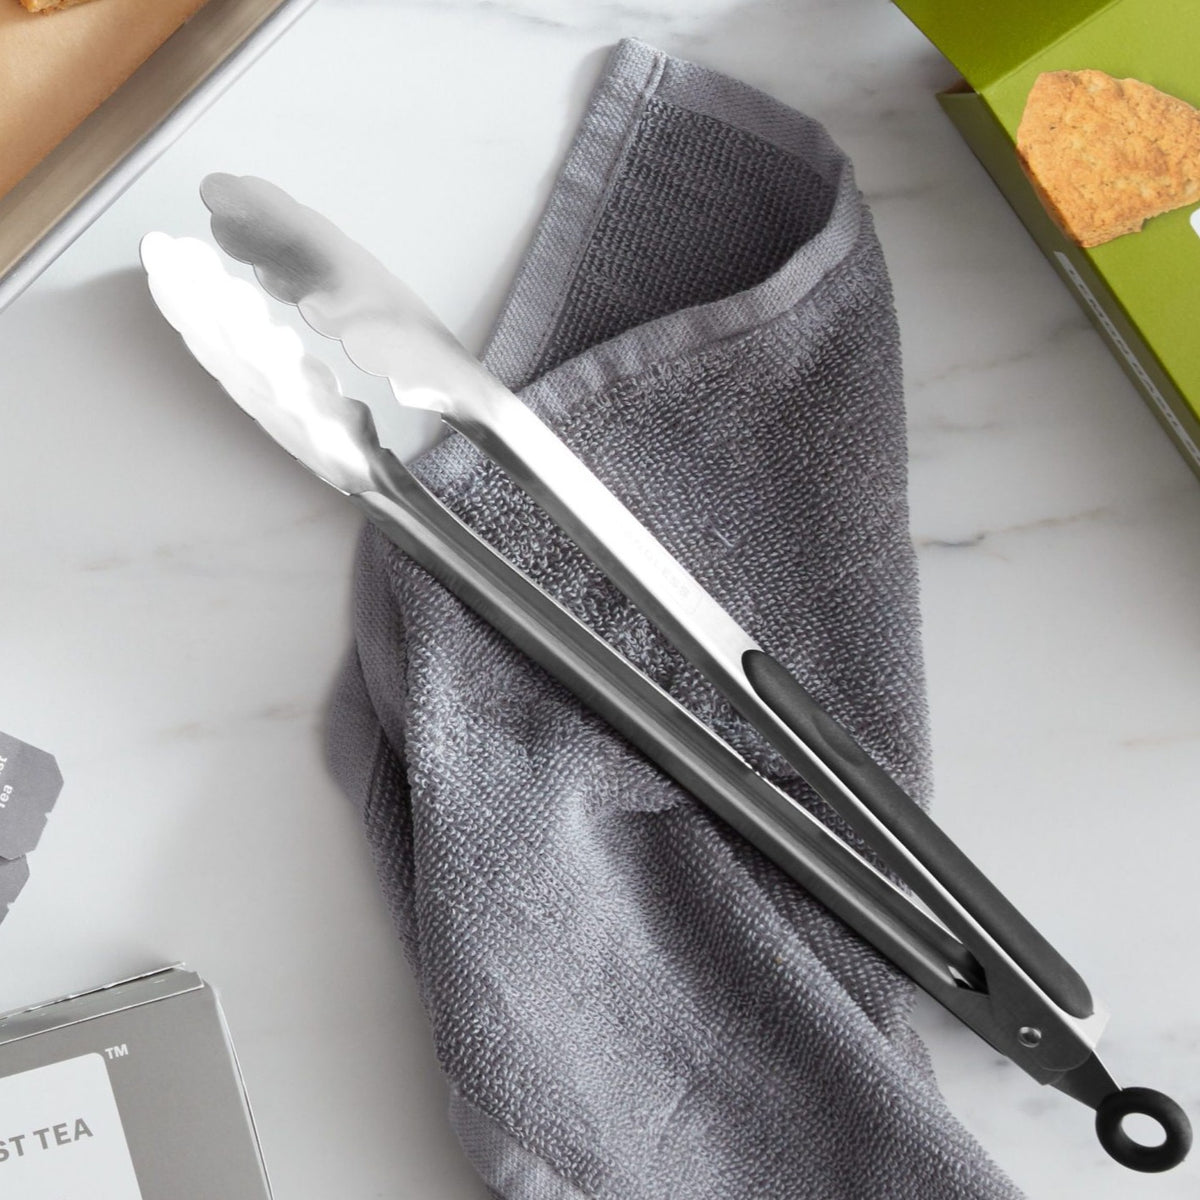 Lifestyle photo, side view, 12 inch stainless steel tongs, in closed and locked position, laying on kitchen towel on a kitchen counter.